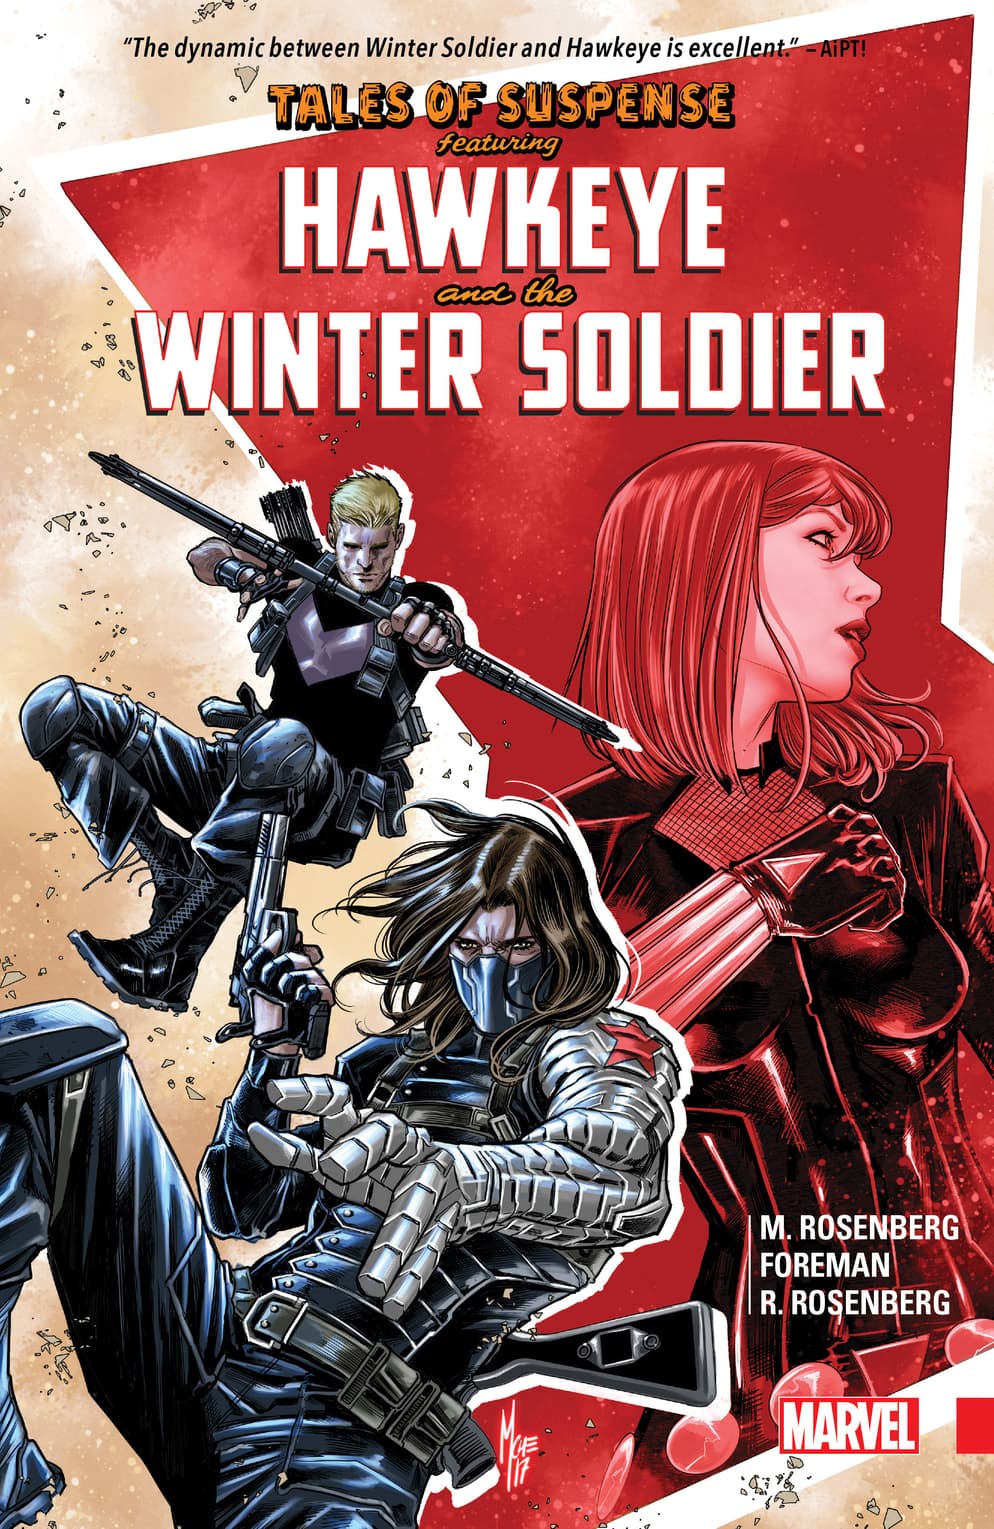 Cover to  Tales of Suspense: Hawkeye & The Winter Soldier.